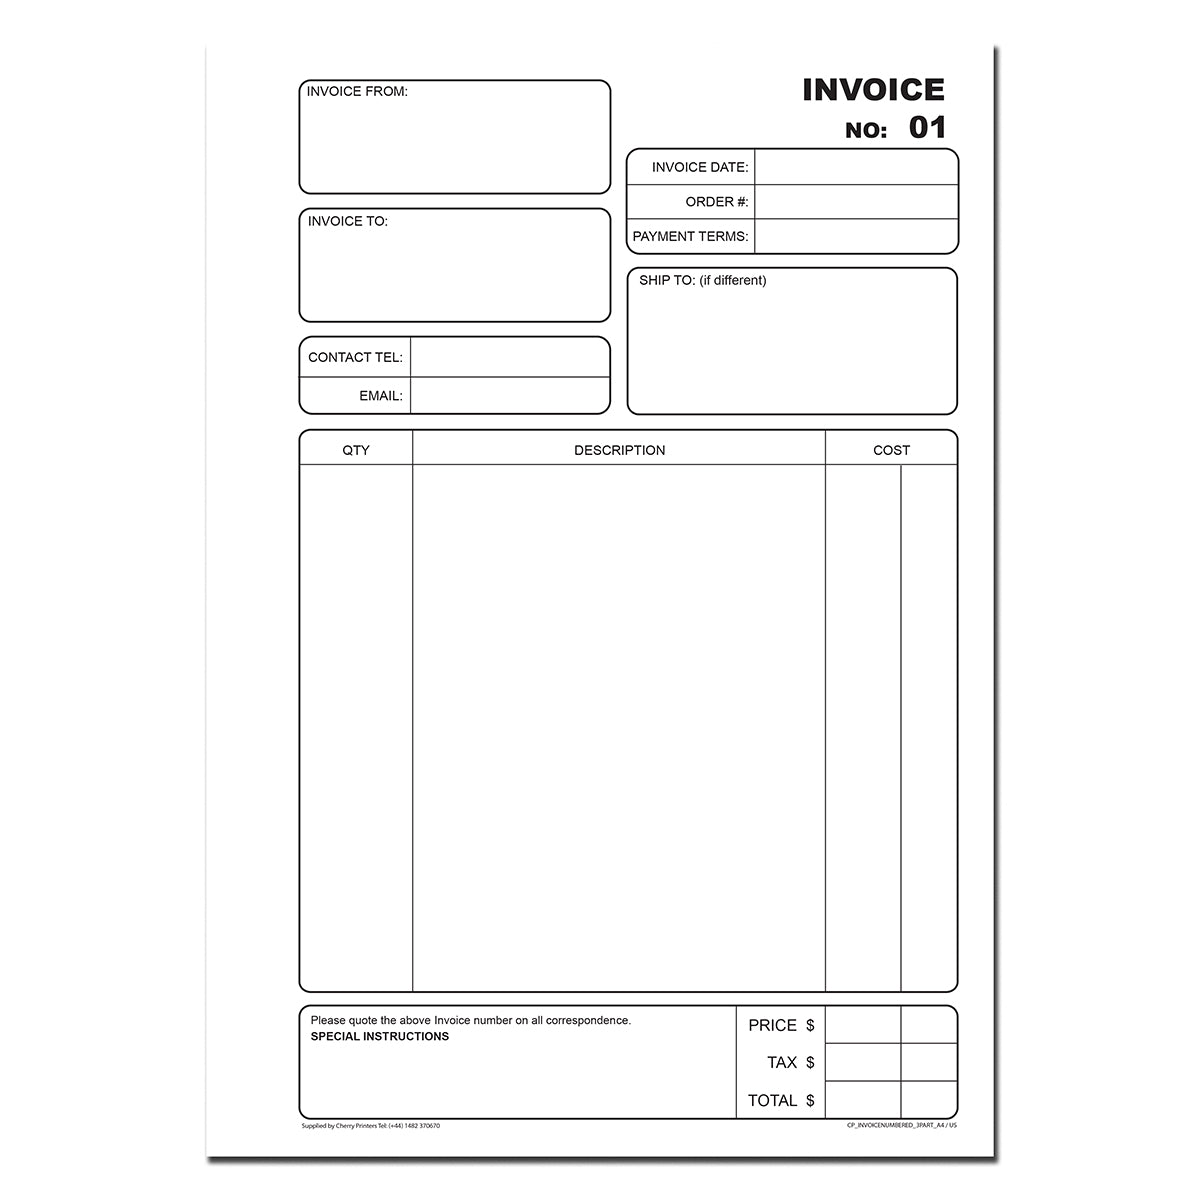 Invoice Numbered 01-50 | Triplicate Book | 3 part | Carbonless | 50 Sets Per Book | A4 - 8.27" x 11.69" | BOX OF 16 BOOKS